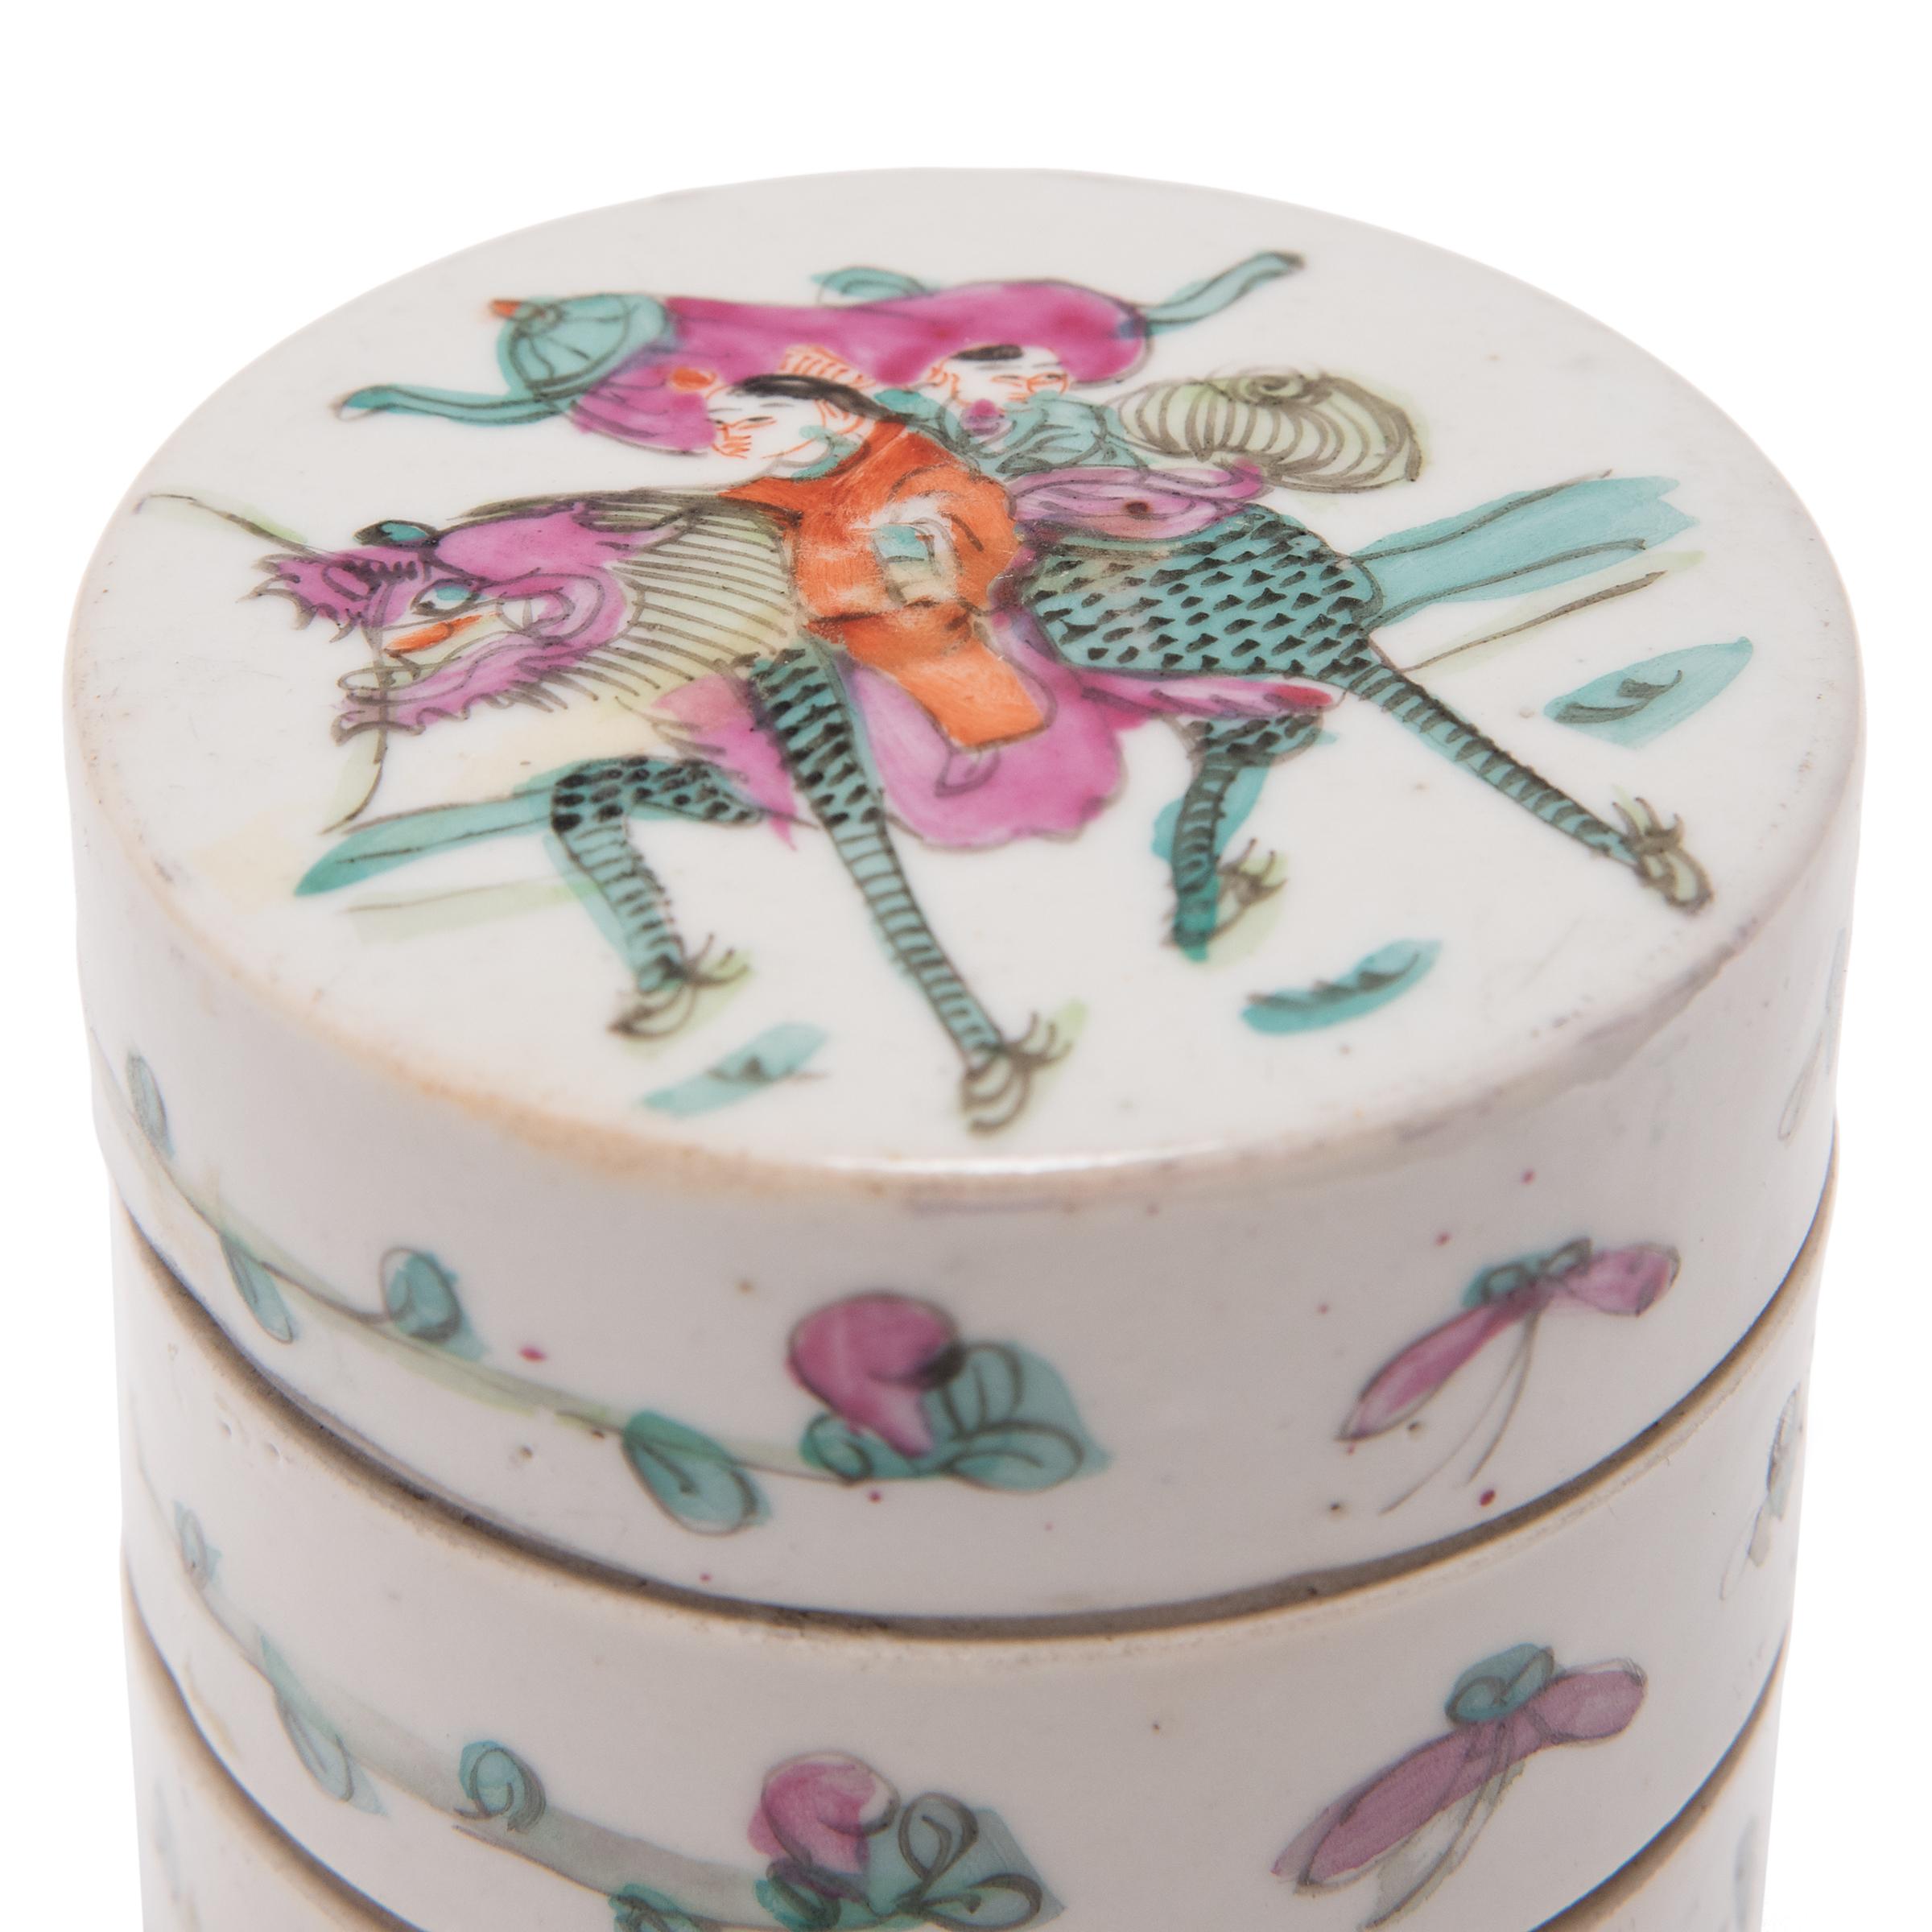 20th Century Chinese Porcelain Stacking Box with Mythical Qilin, c. 1900